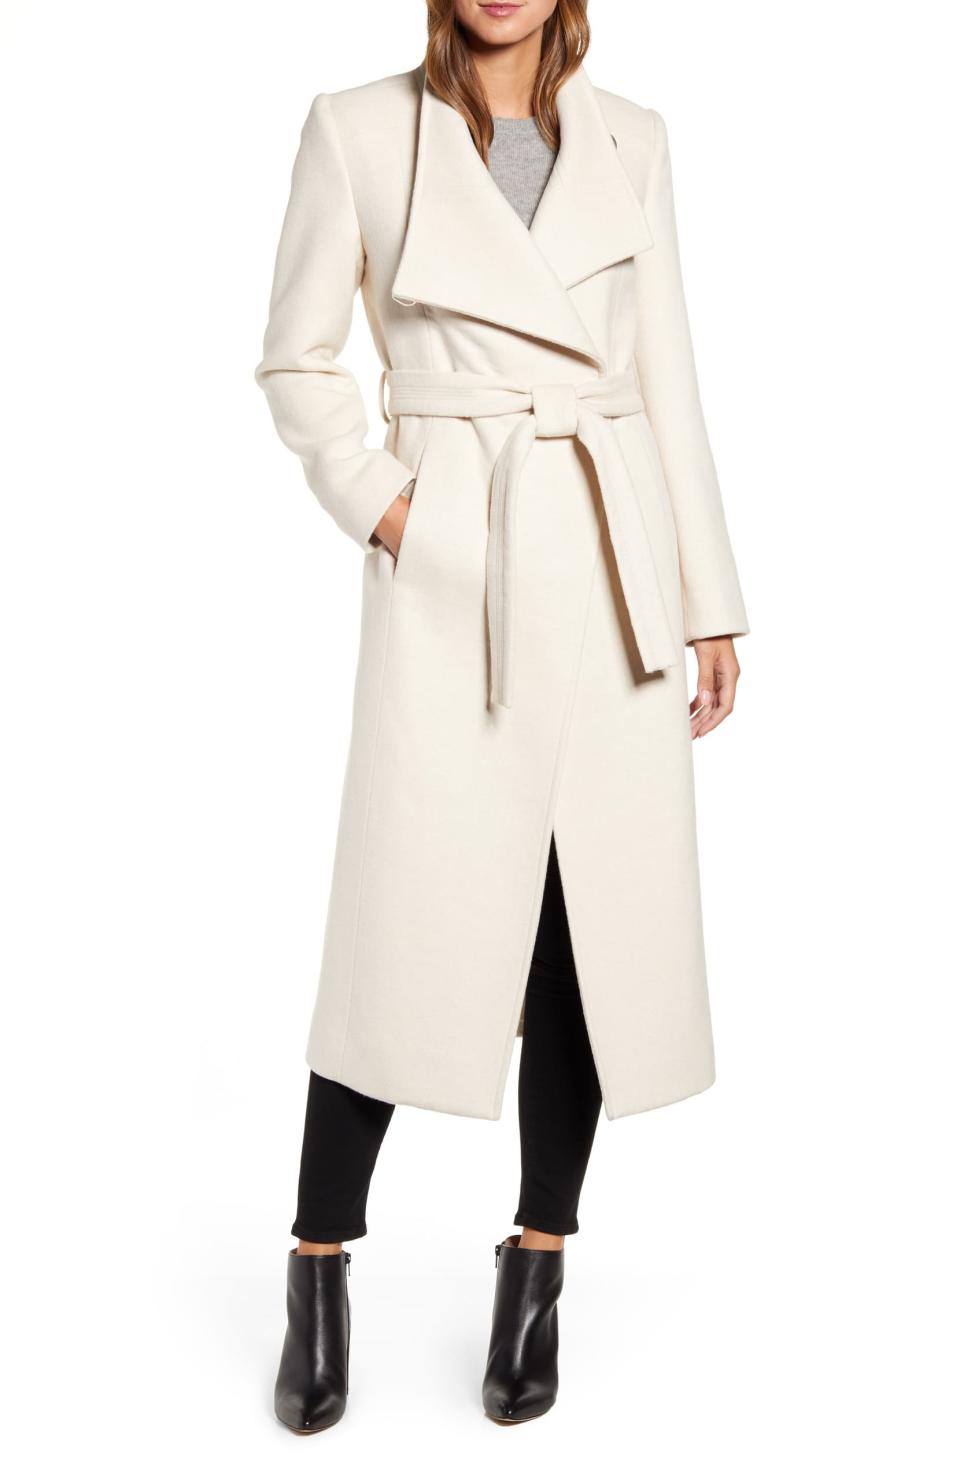 Available in four different colors, this coat is effortlessly stylish. (Photo: Nordstrom)